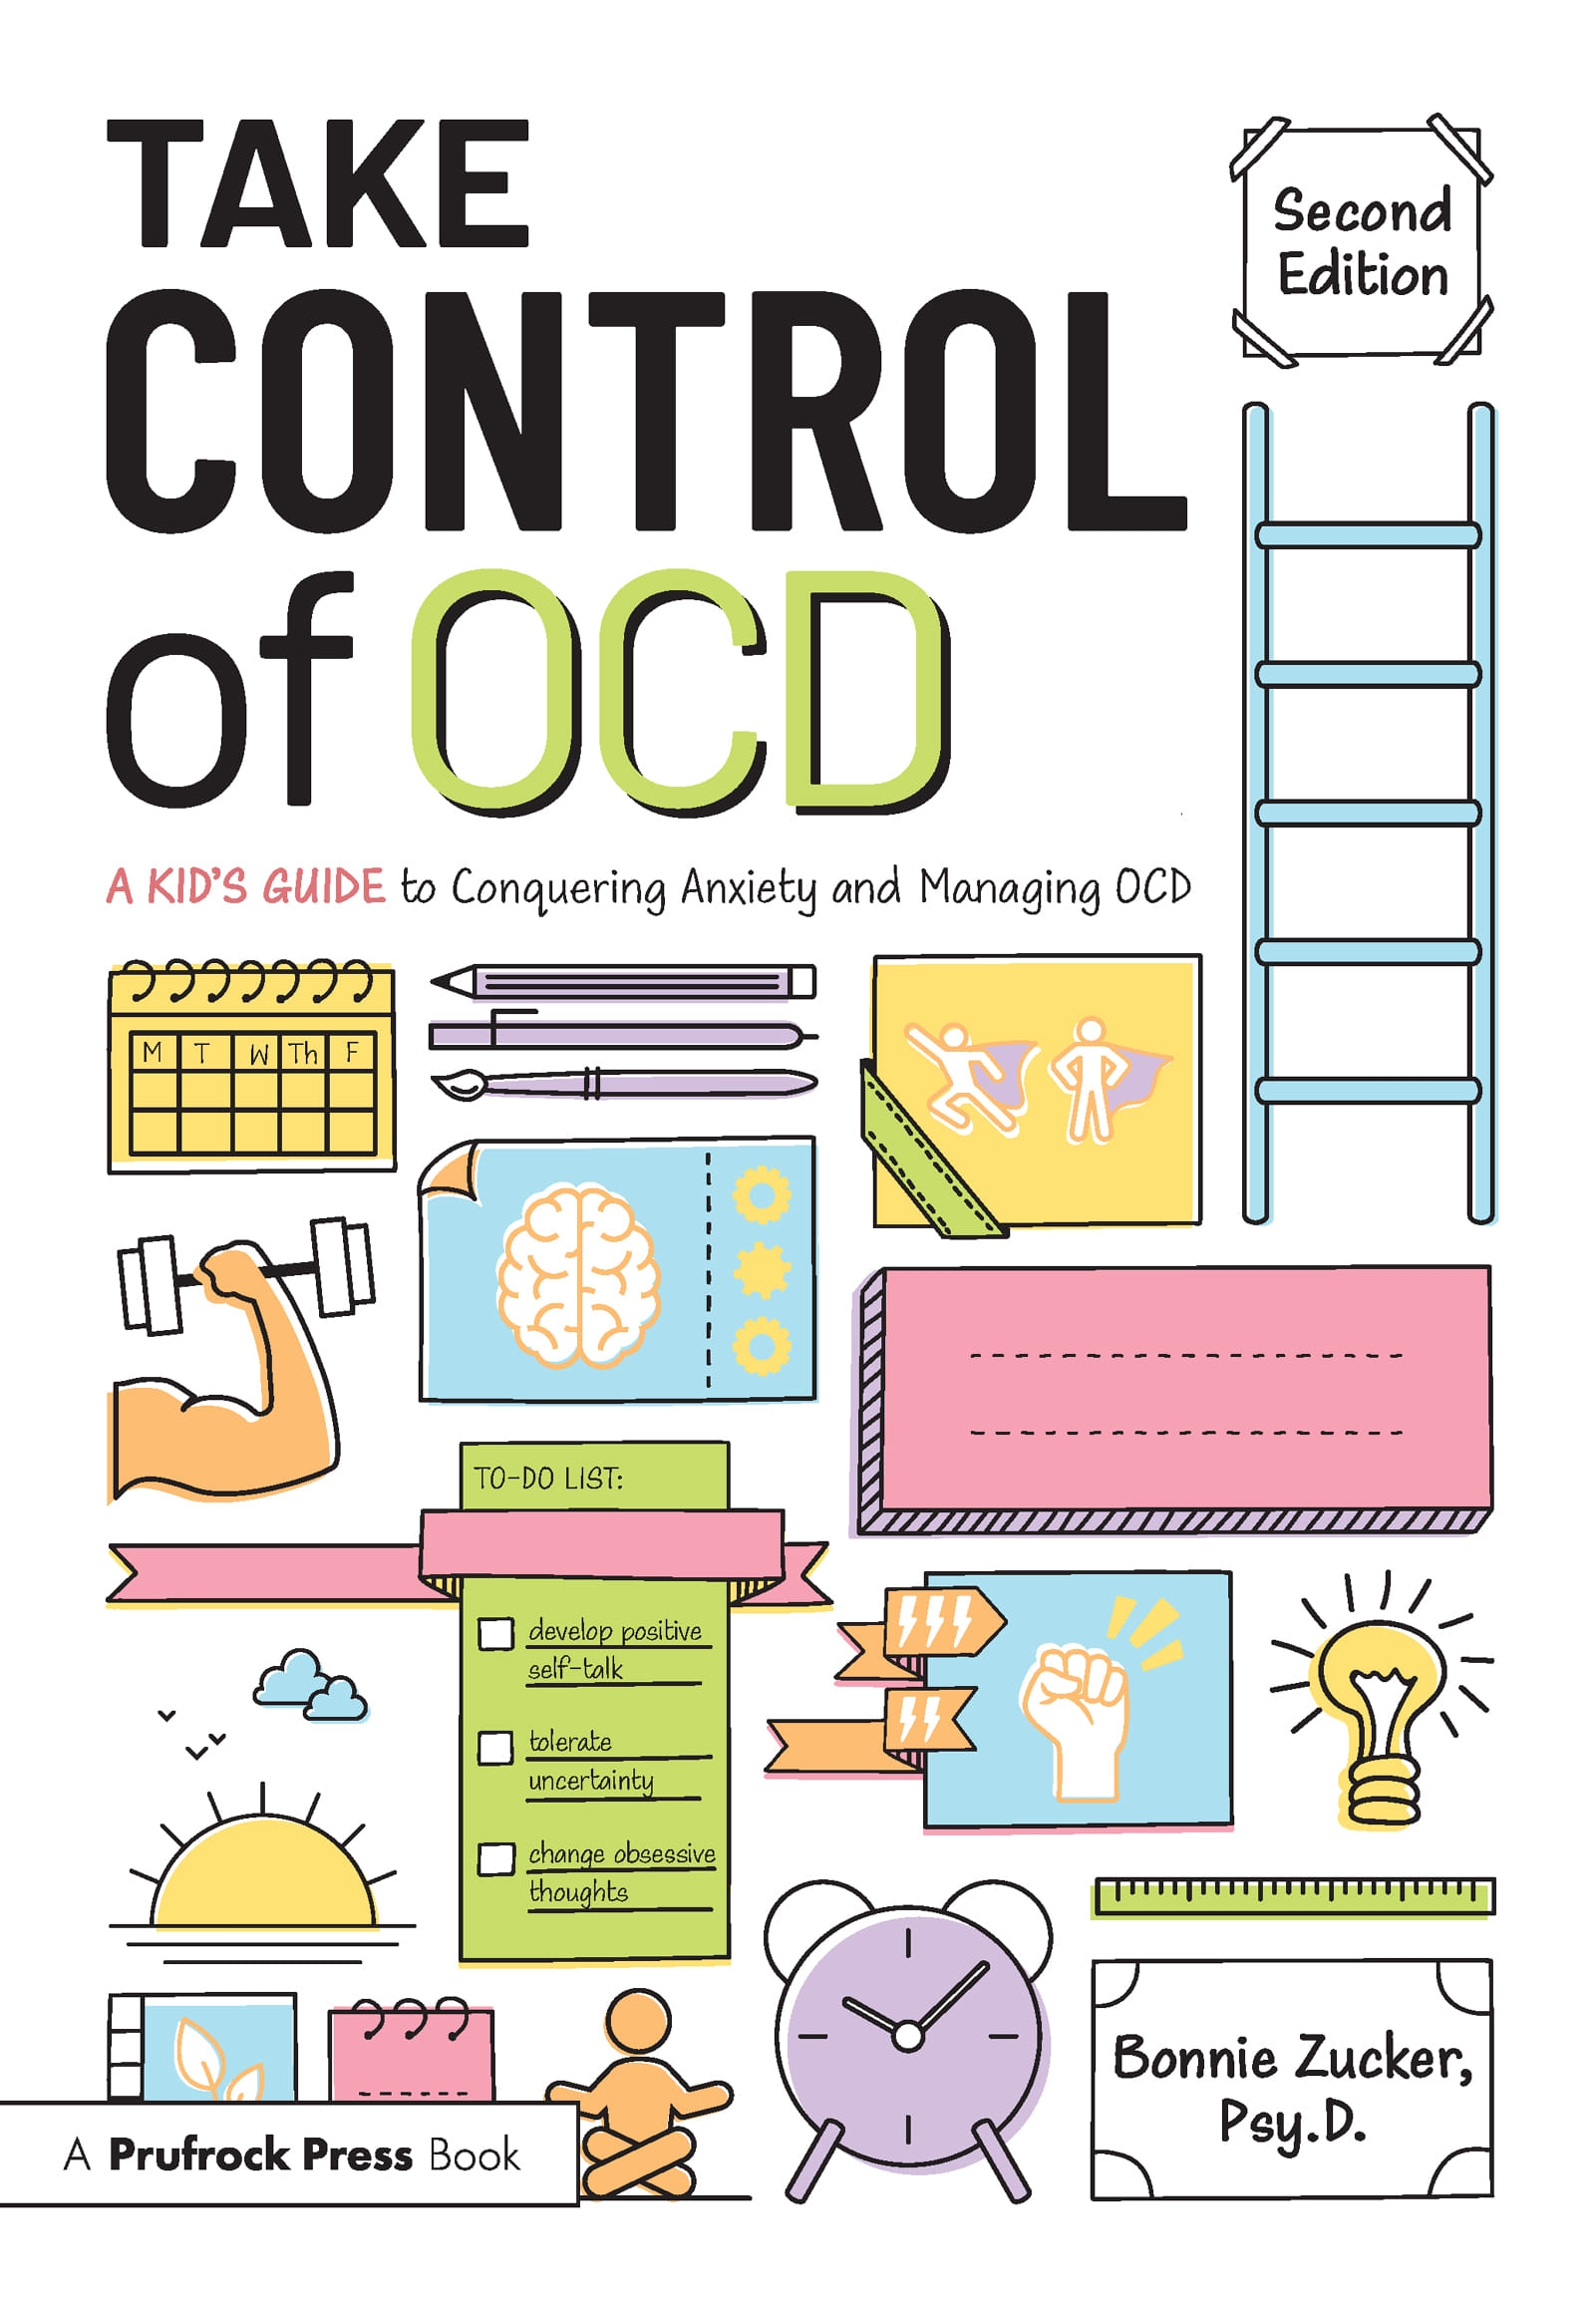 Take Control of Ocd: A Kid’’s Guide to Conquering Anxiety and Managing Ocd